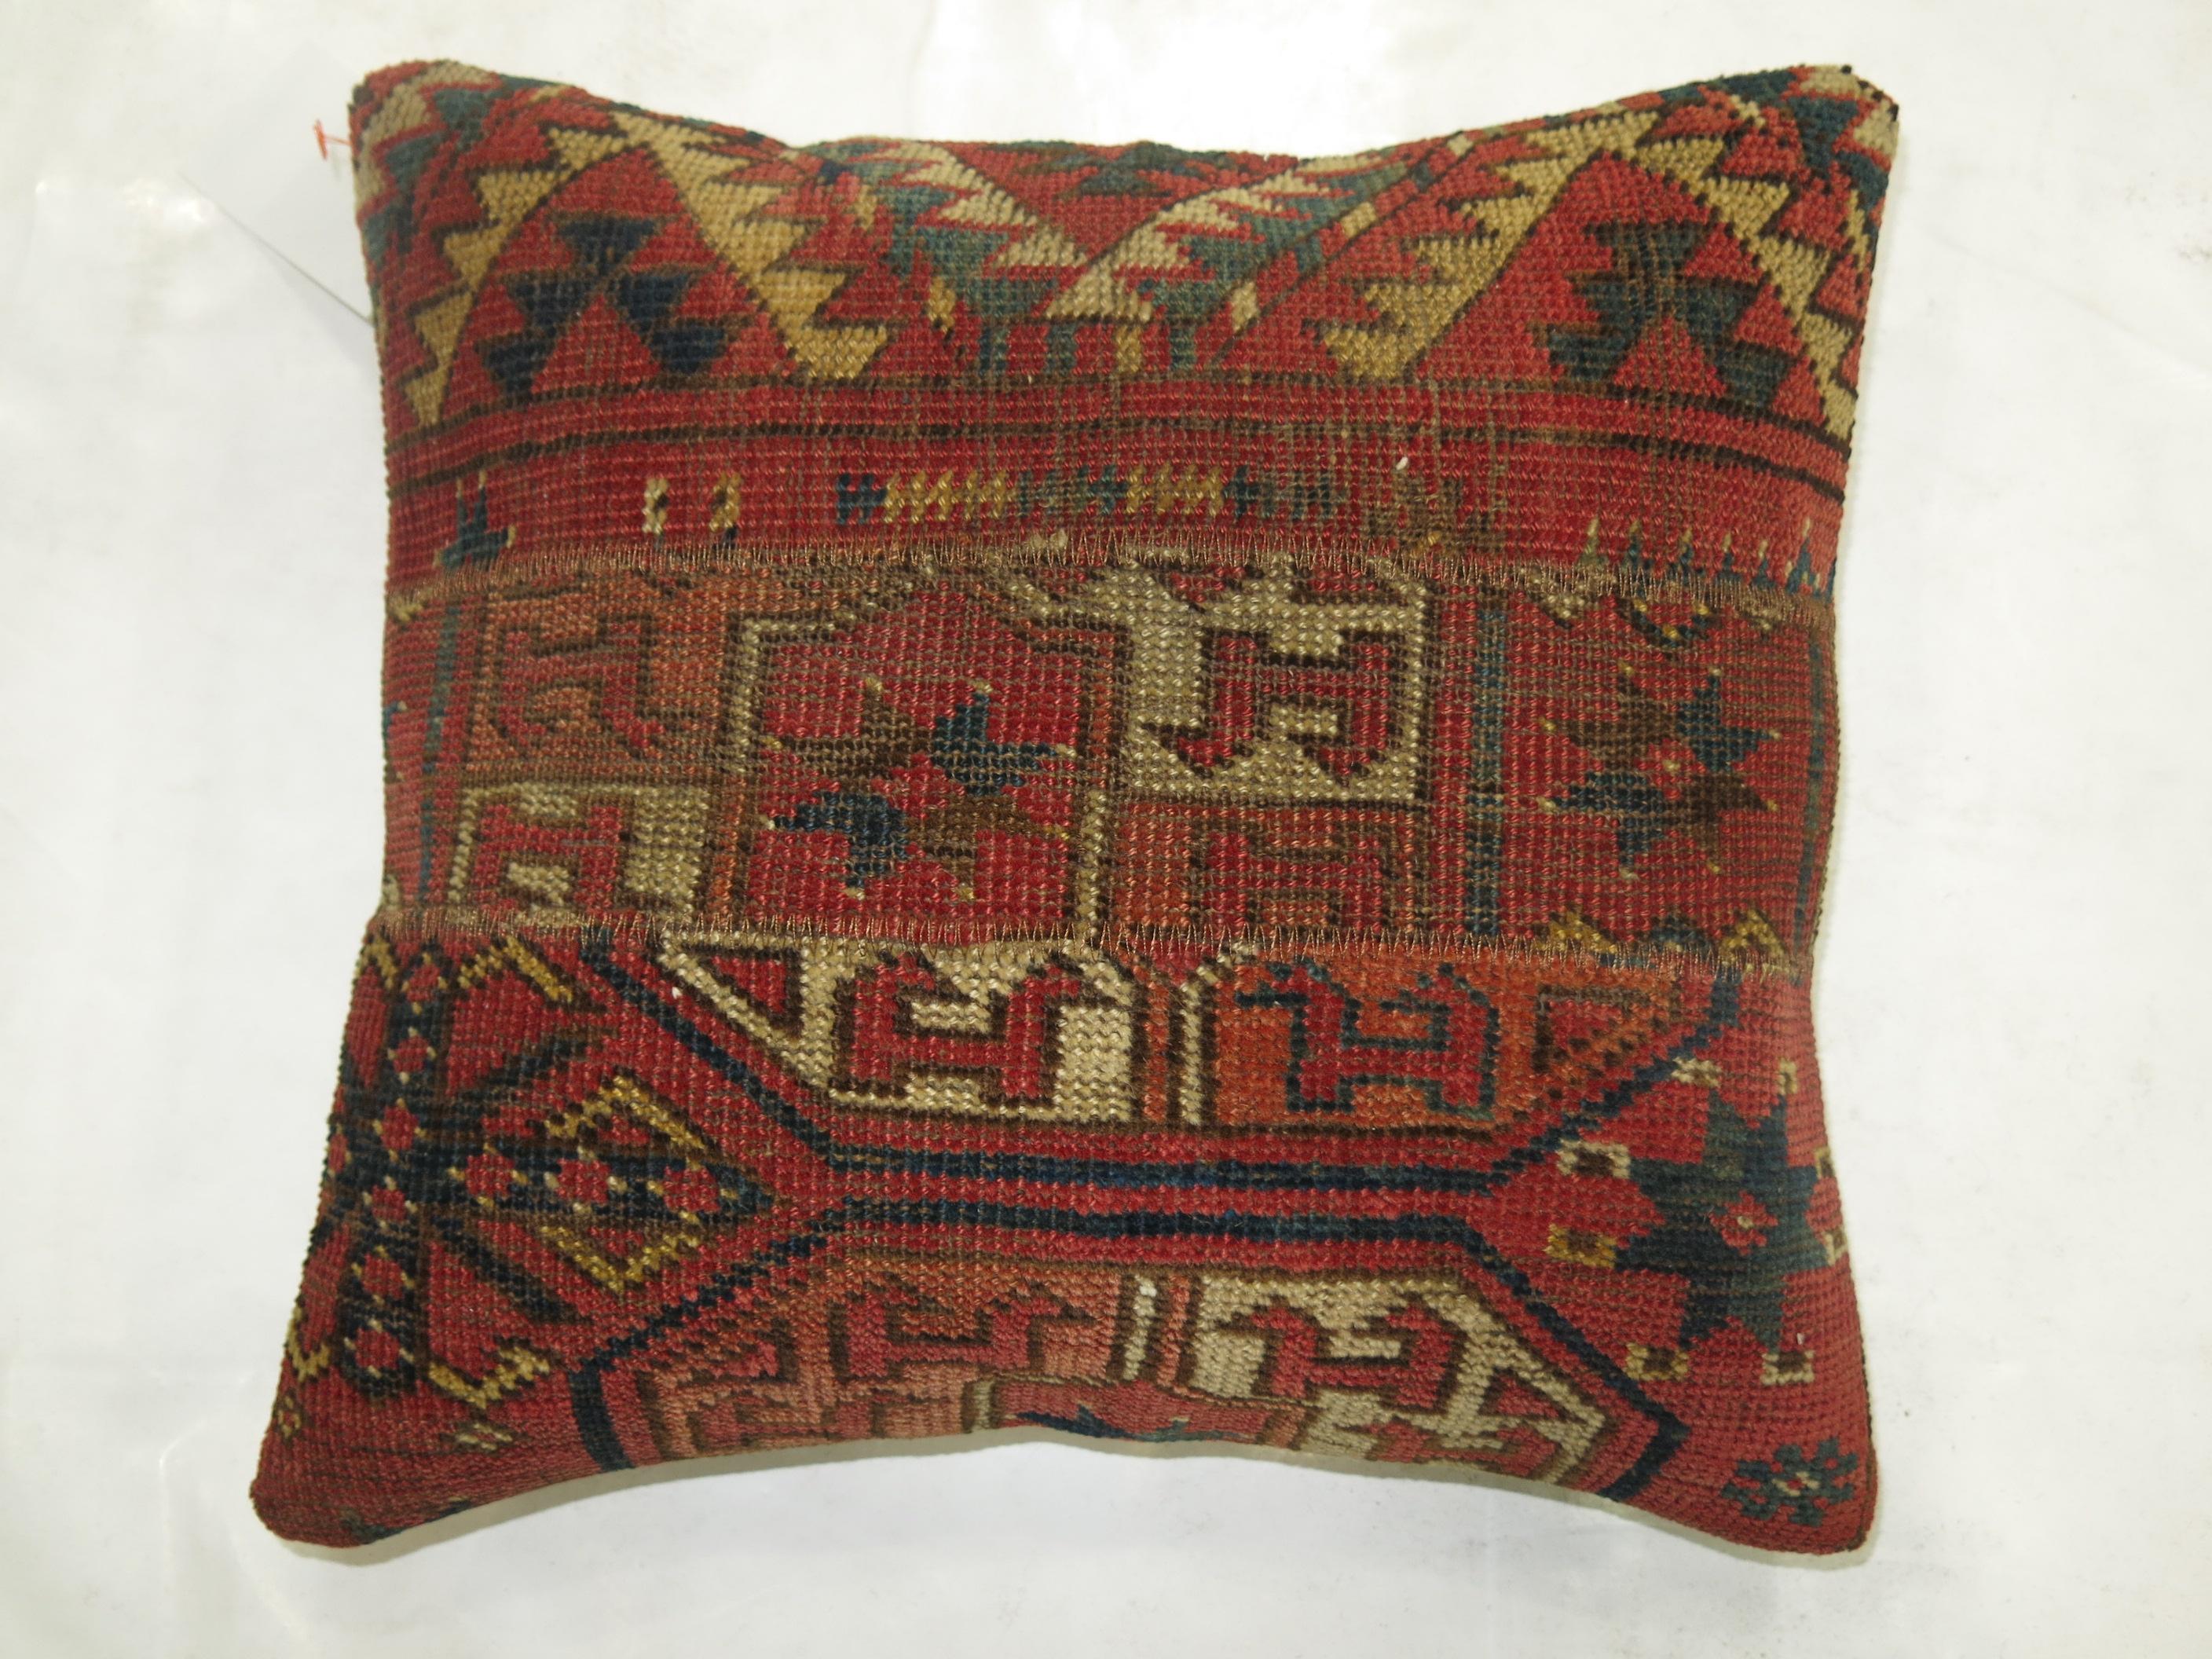 Hand-Woven Antique Rug Pillow from 19th Century Turkeman Rug